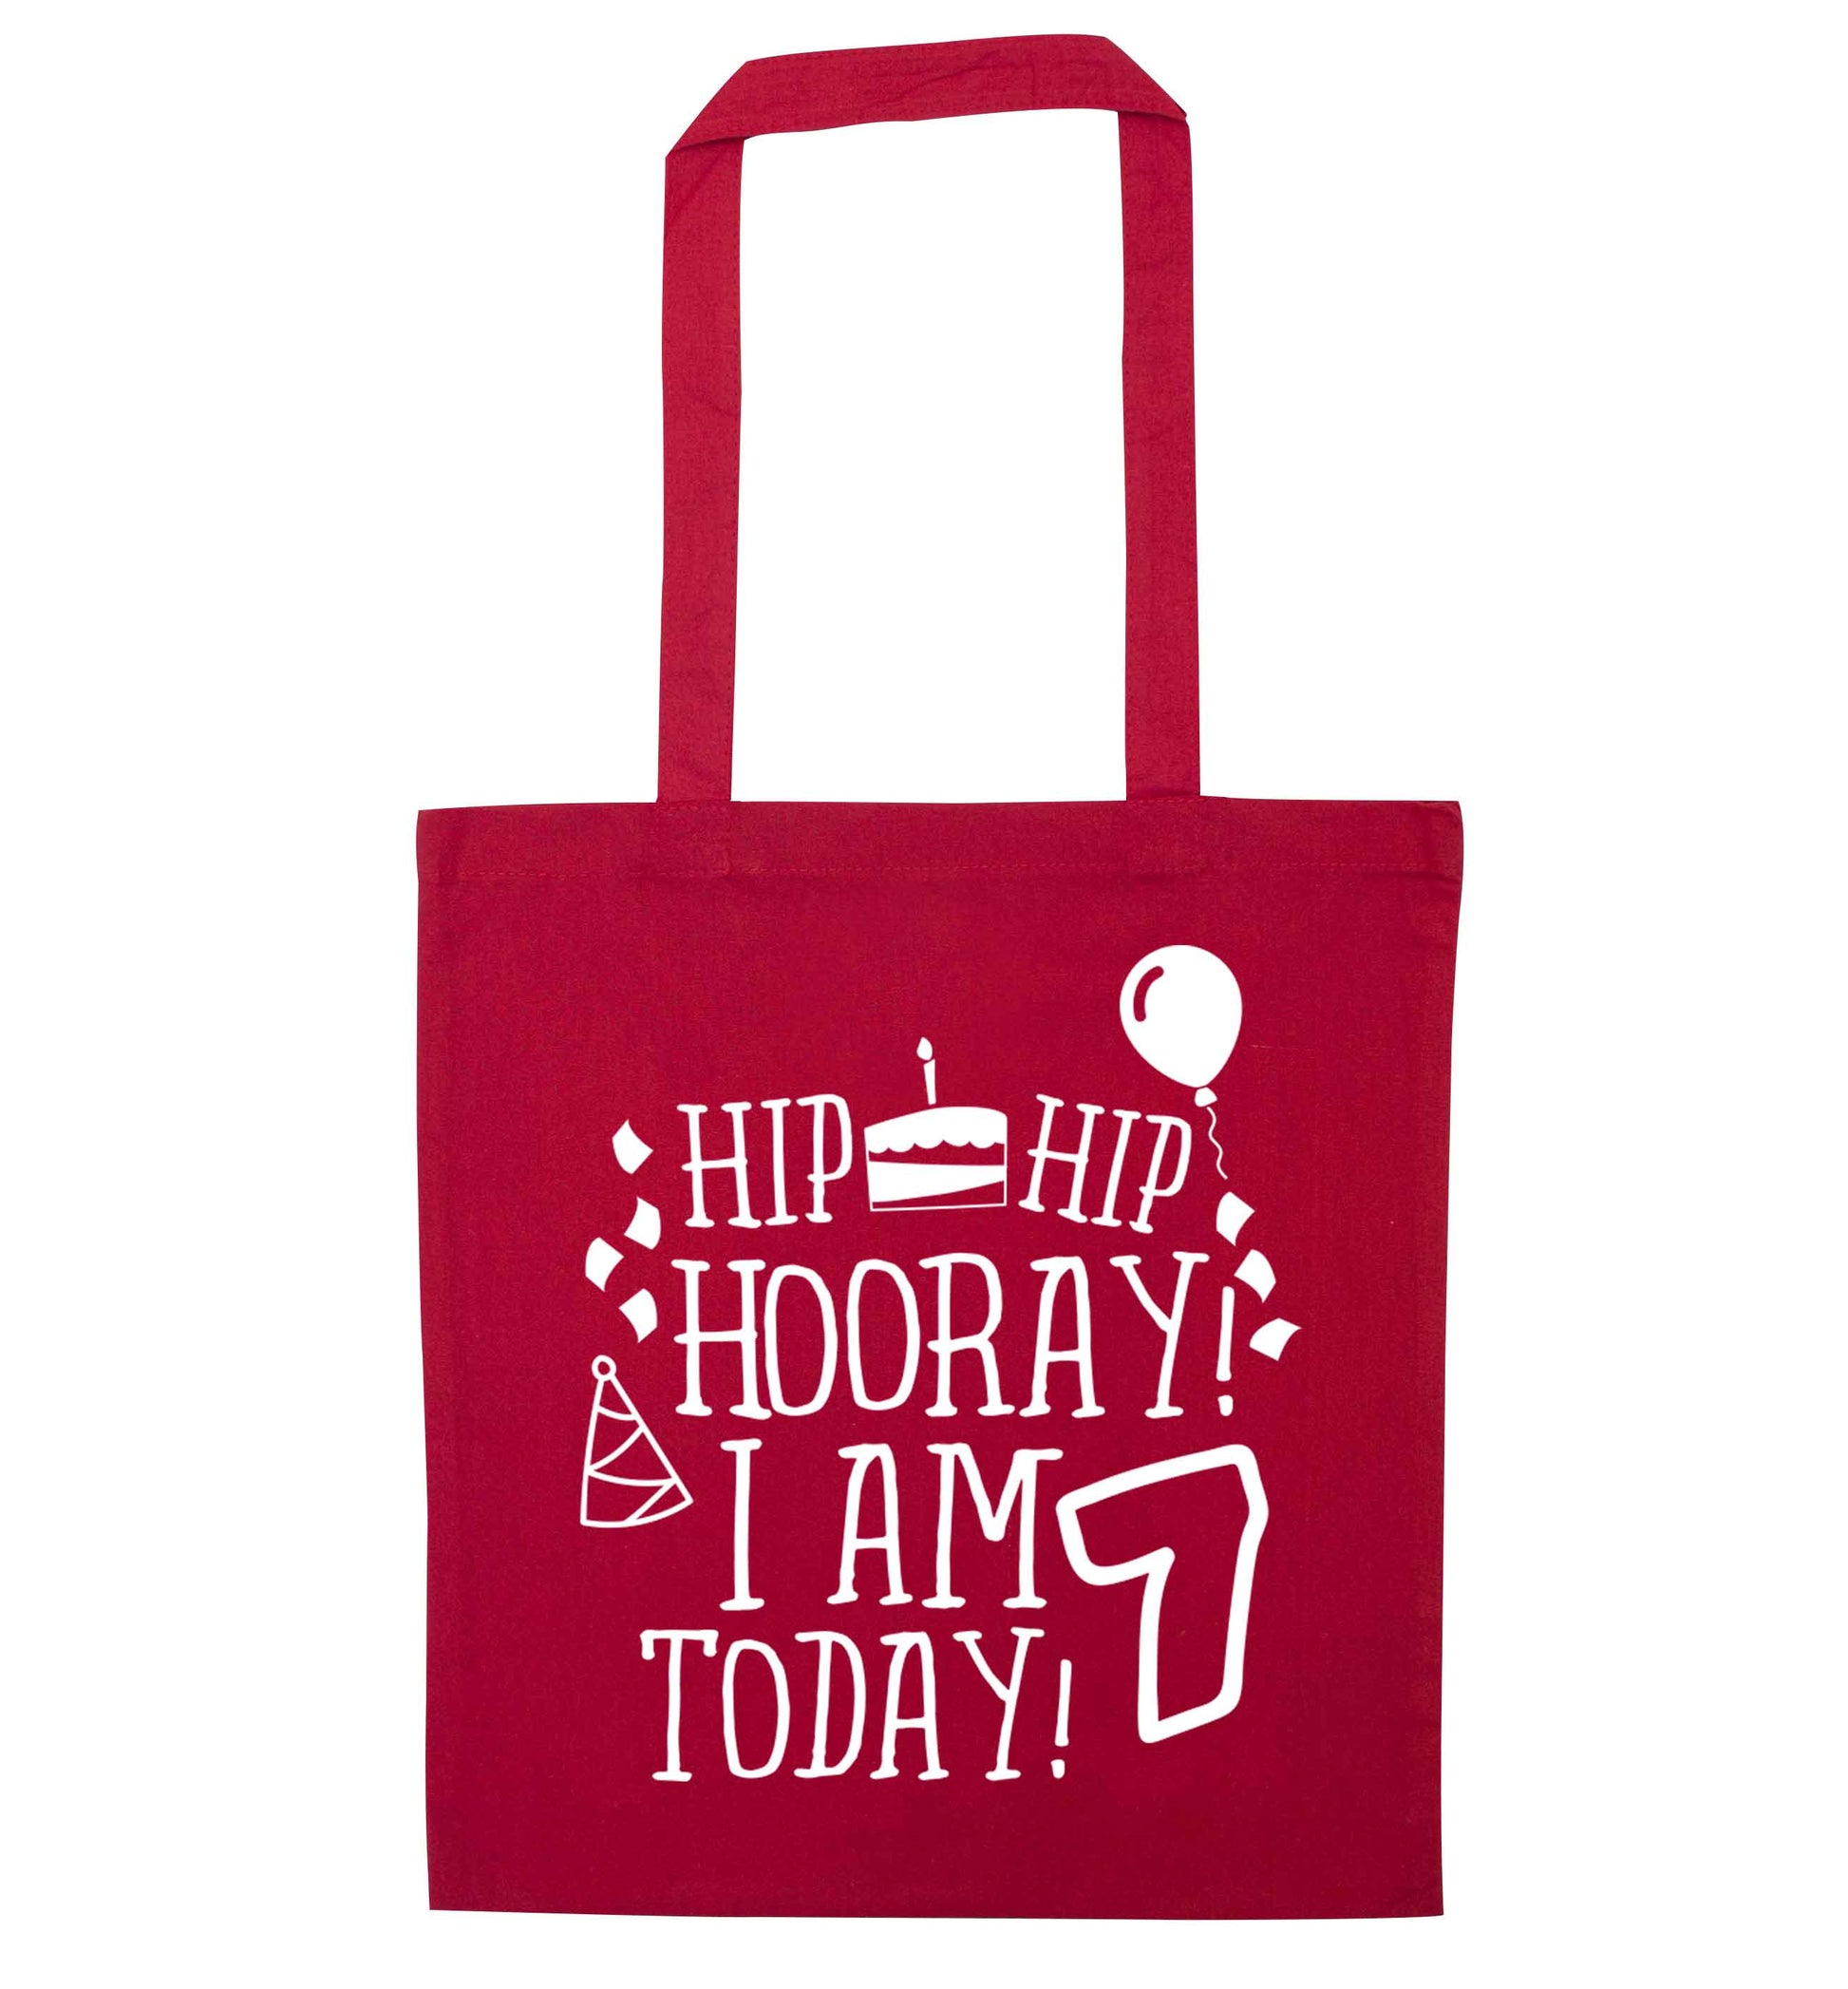 Hip hip I am seven today! red tote bag